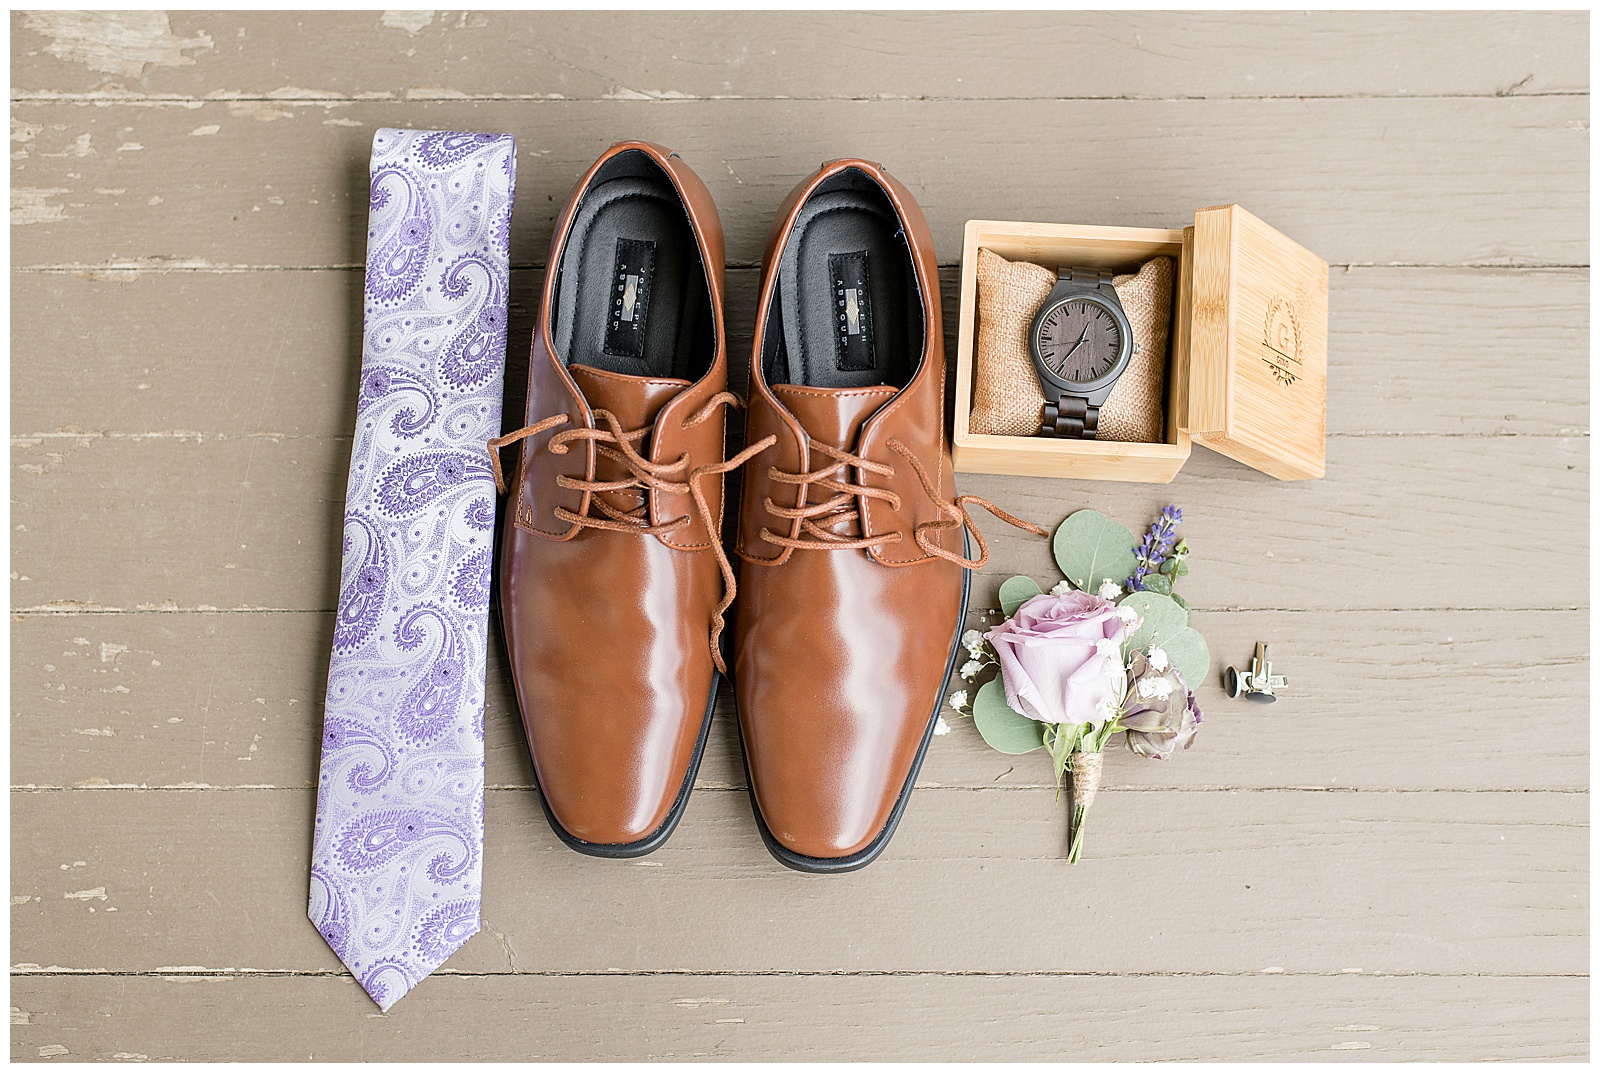 groom's light brown dress shoes on display surrounded by light purple tie, charcoal gray watch inside box, and rose and eucalyptus boutonnerie